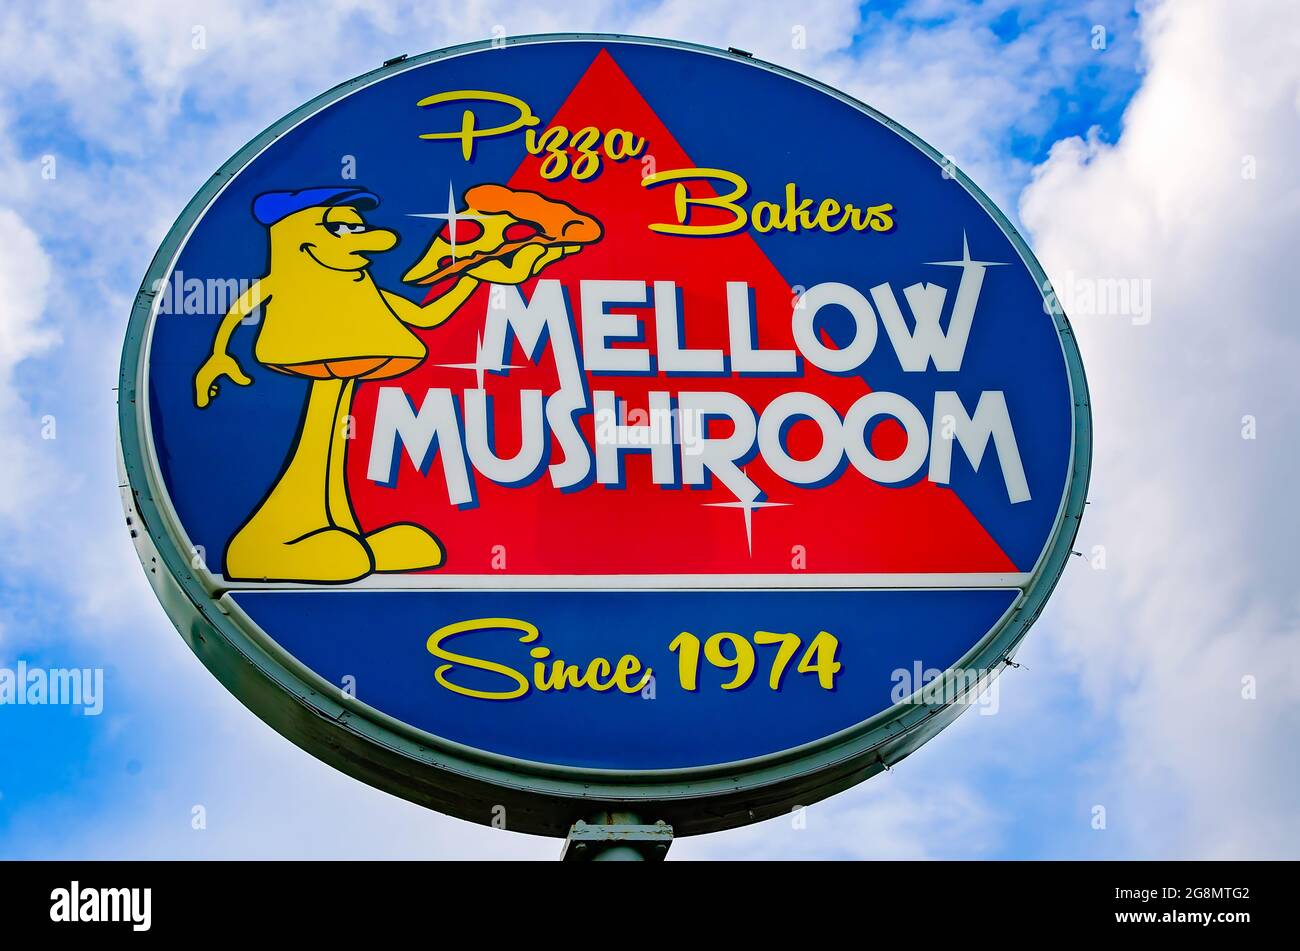 The Mellow Mushroom sign features artwork of a mushroom character eating a slice of pizza, July 20, 2021, in Mobile, Alabama. Stock Photo